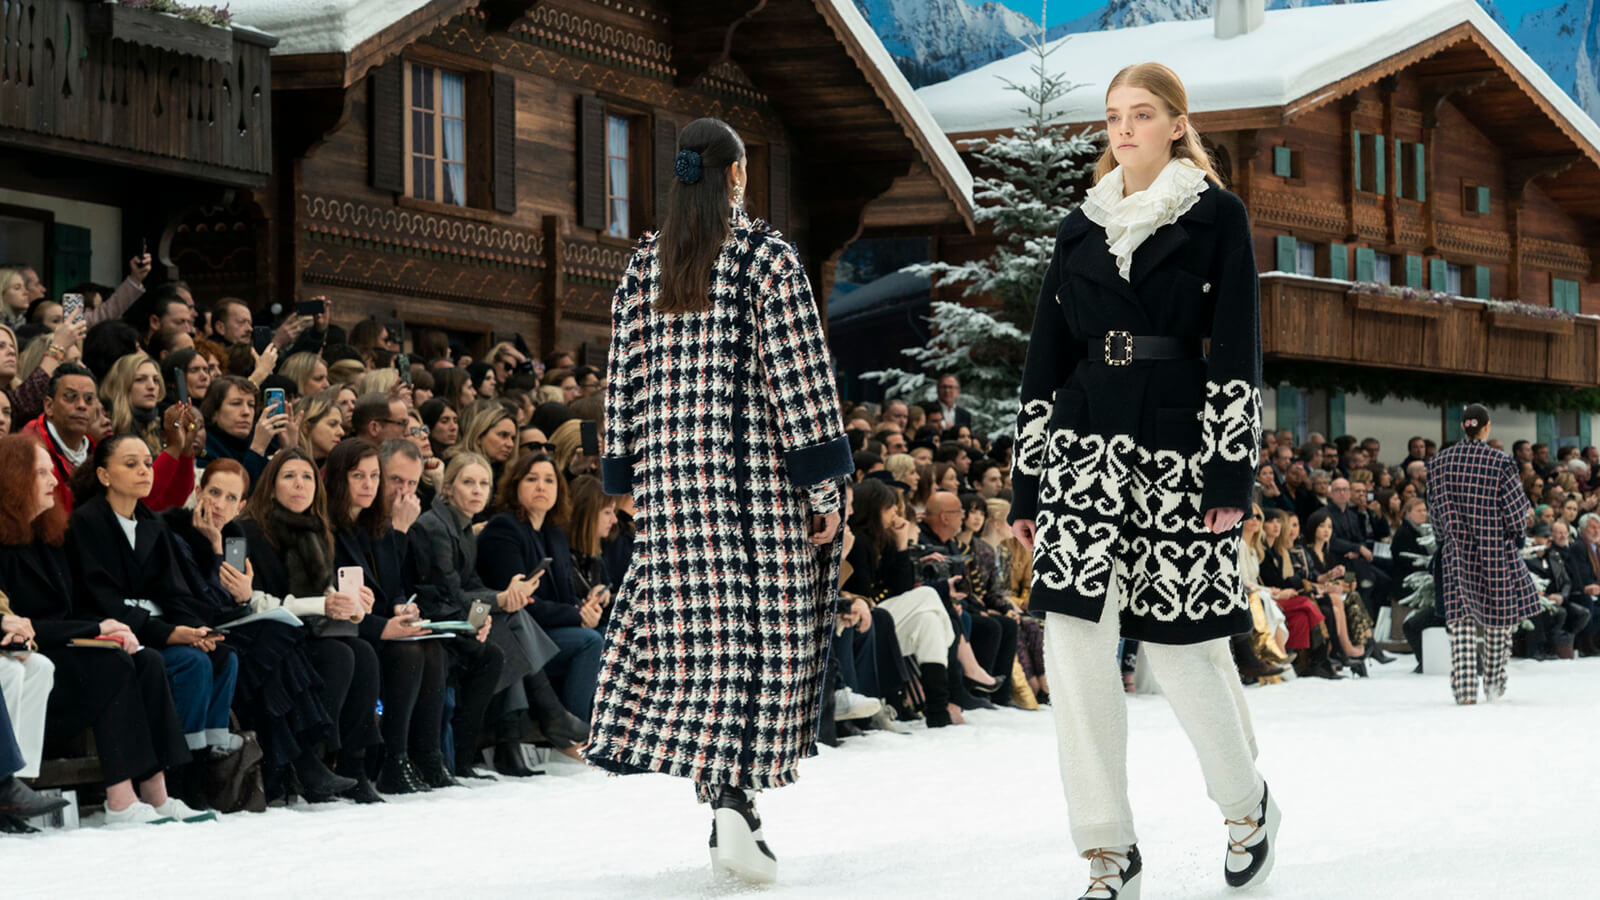 When haute couture hits the slopes: 11 of the most outlandish